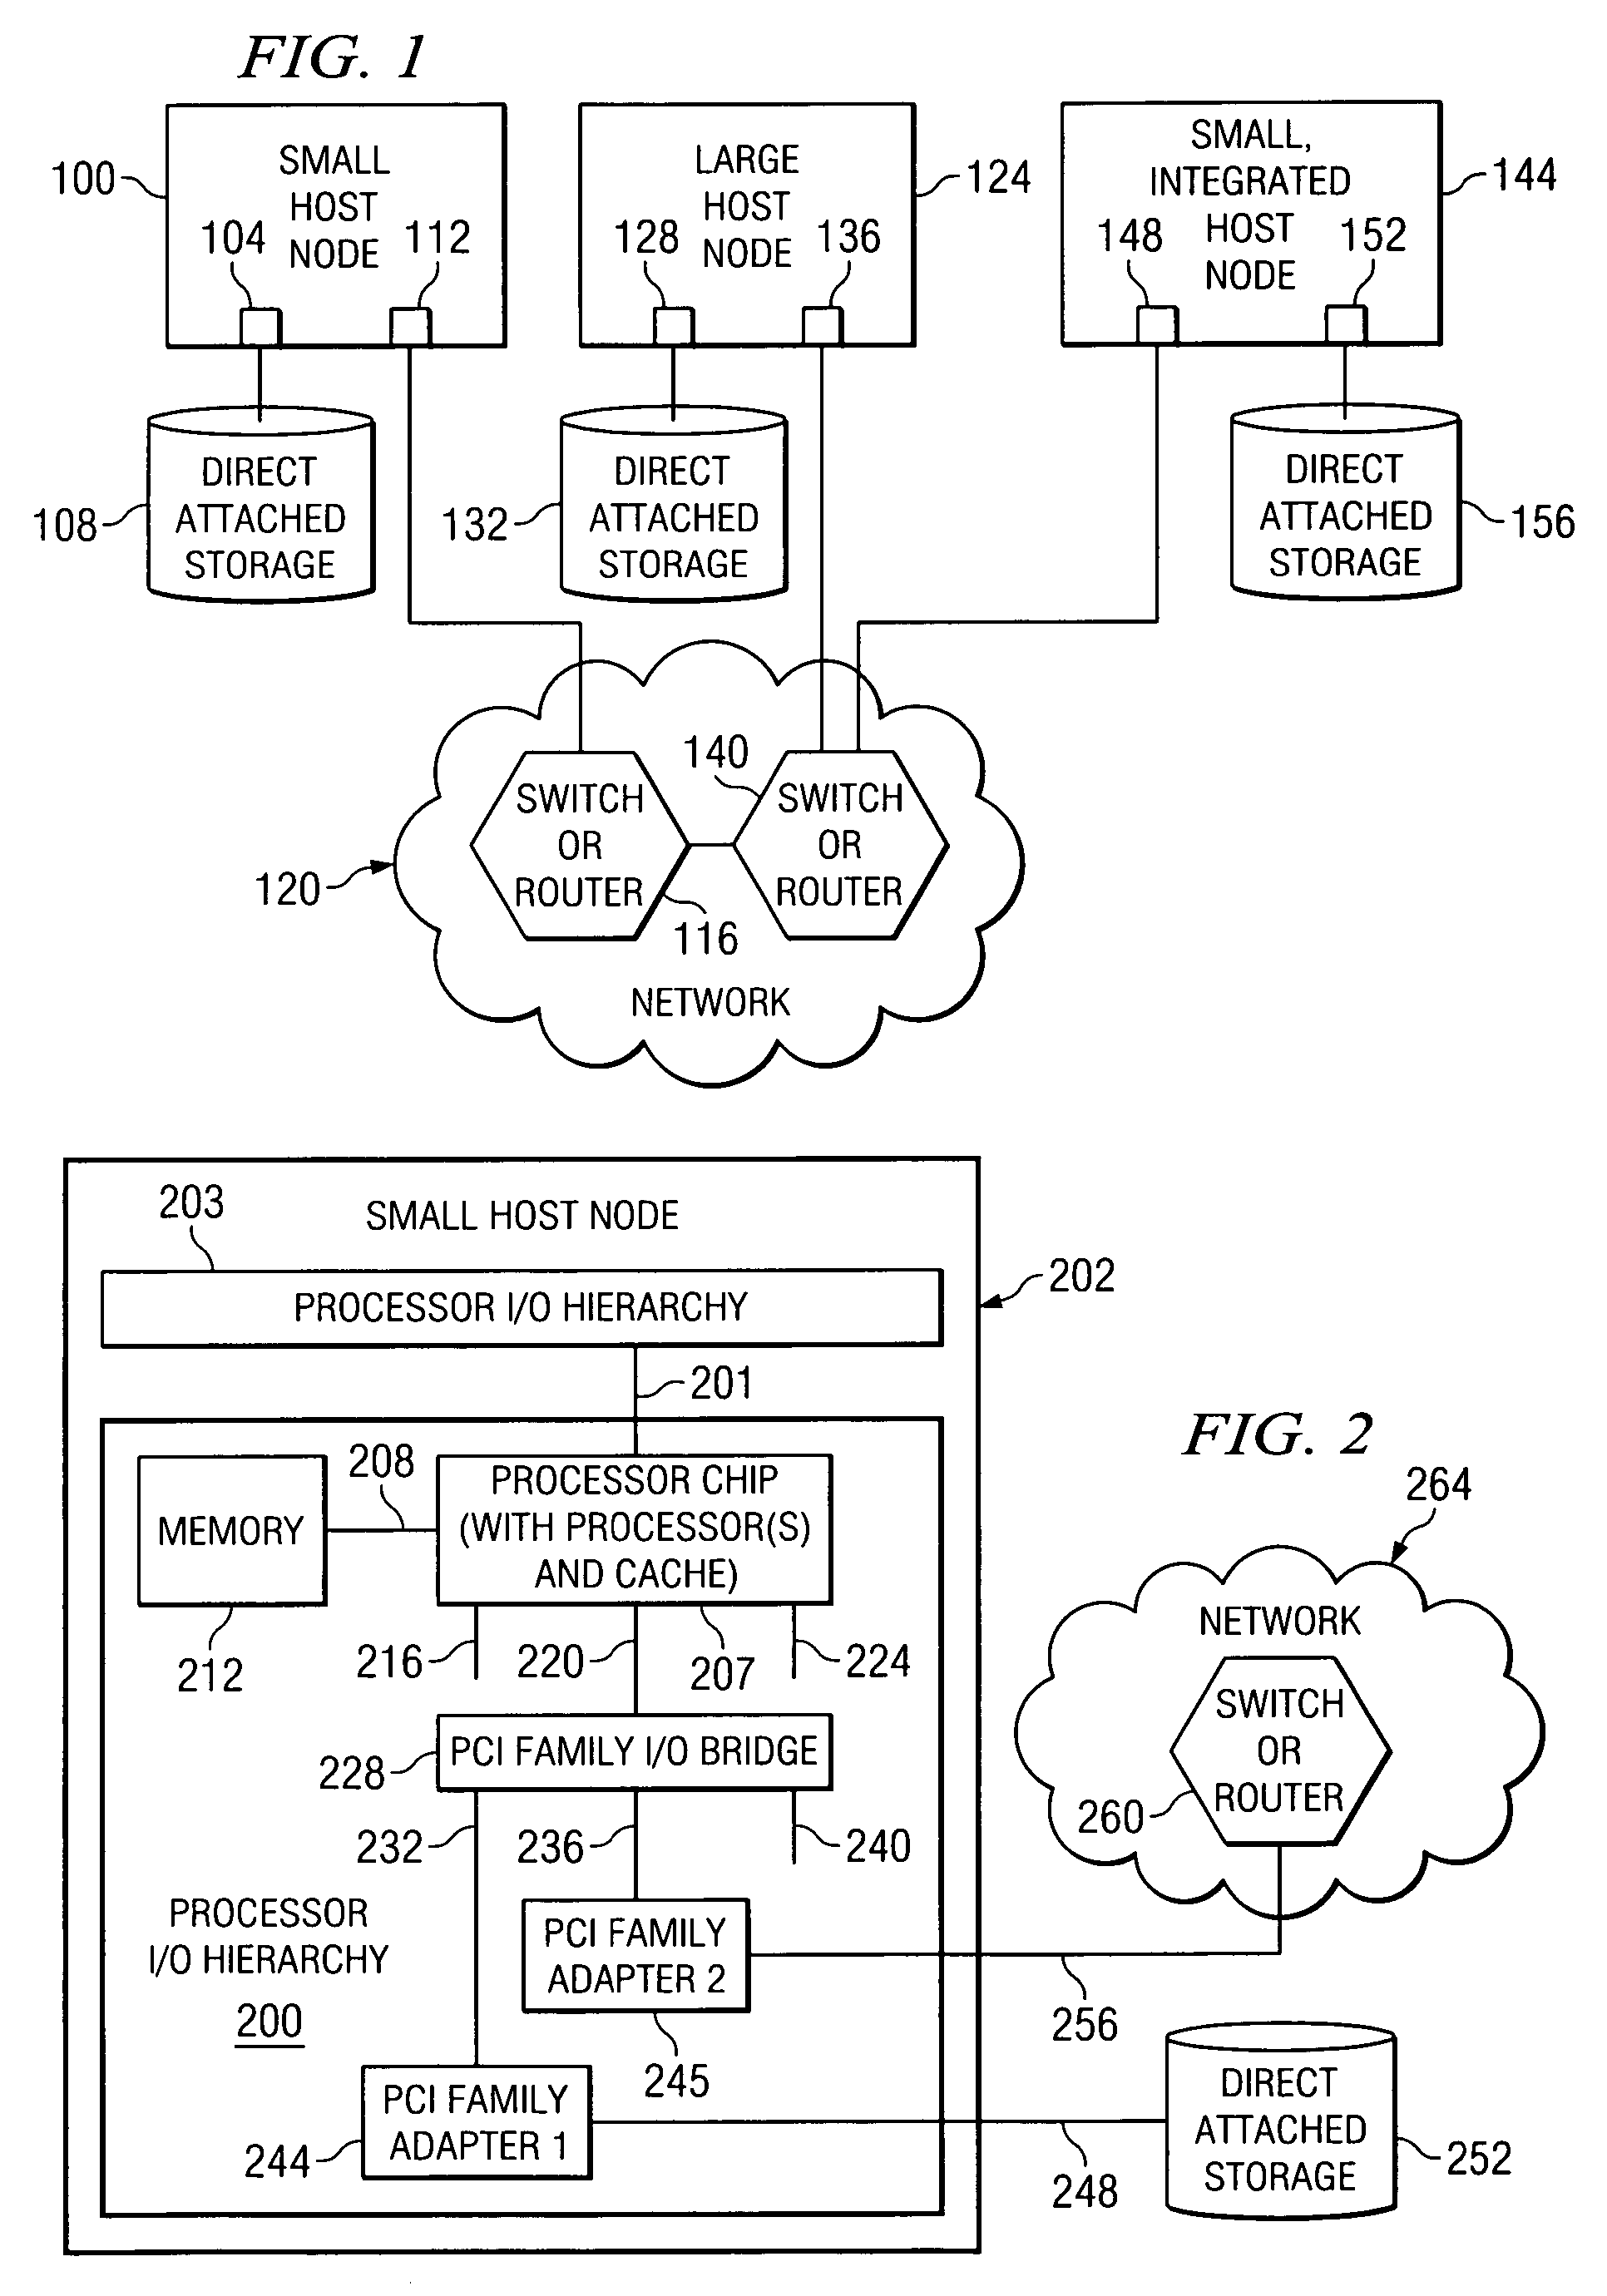 Native virtualization on a partially trusted adapter using PCI host memory mapped input/output memory address for identification